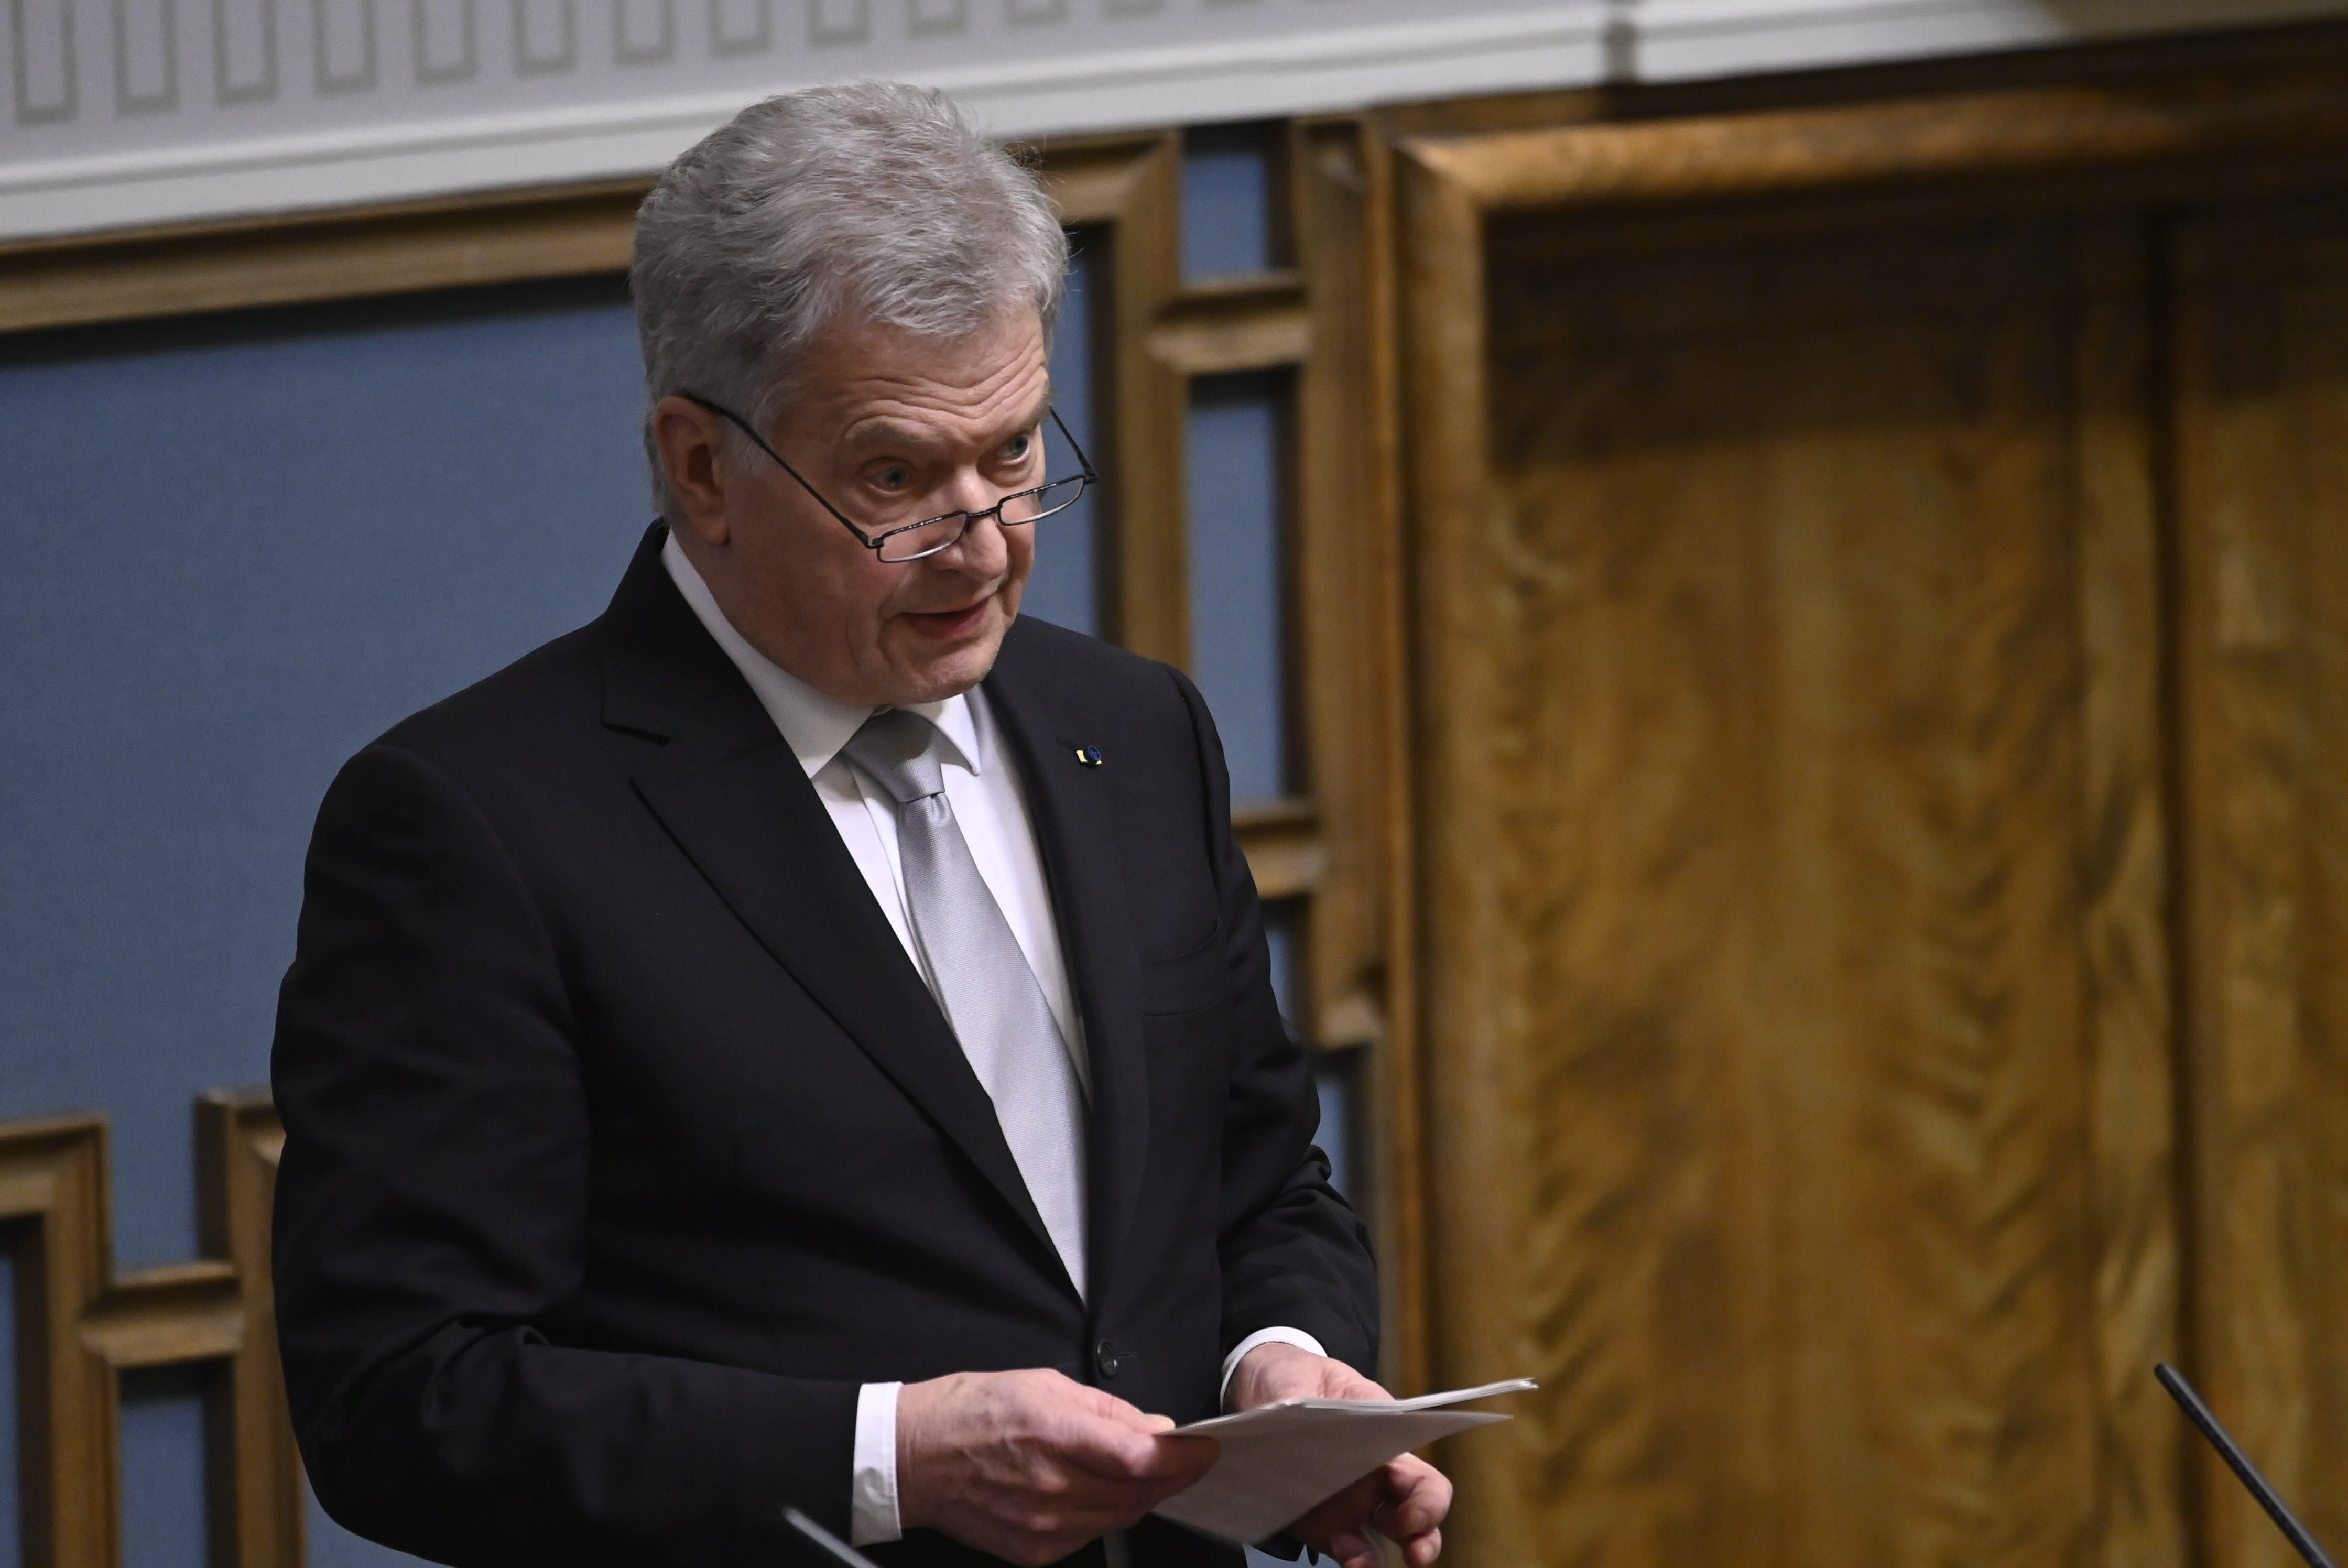 Niinistö: Russia’s letter was meant to cause confusion